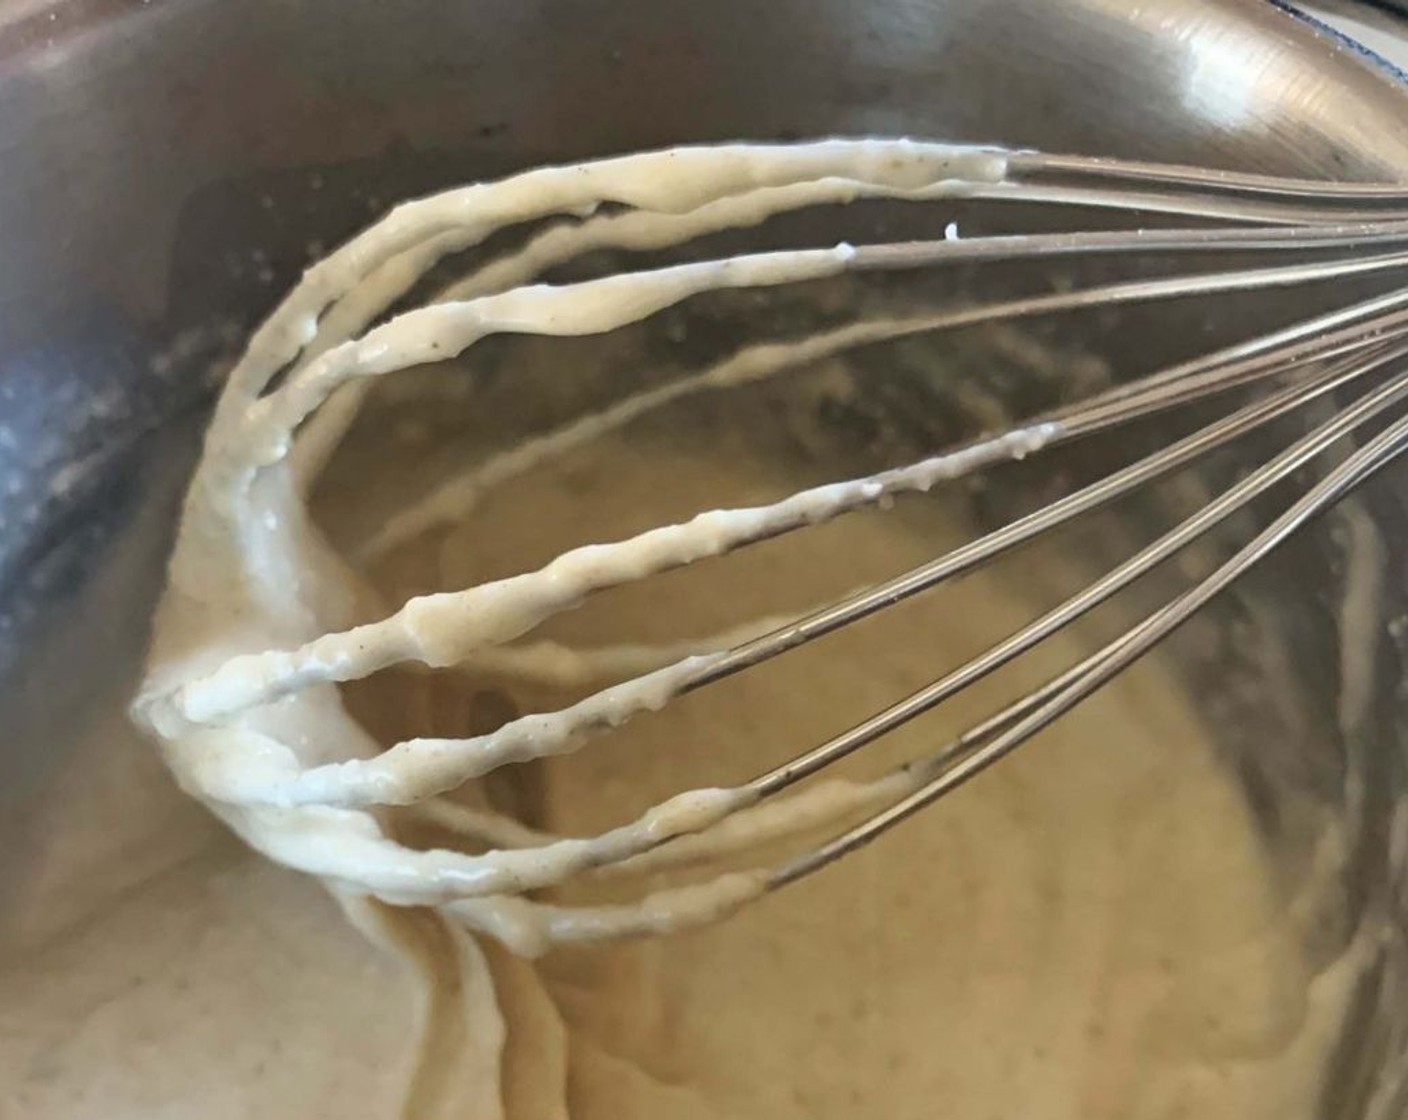 step 2 Whisk until smooth and bring to a gentle boil on low heat, stirring constantly until it gets creamy. It will take 2 minutes!